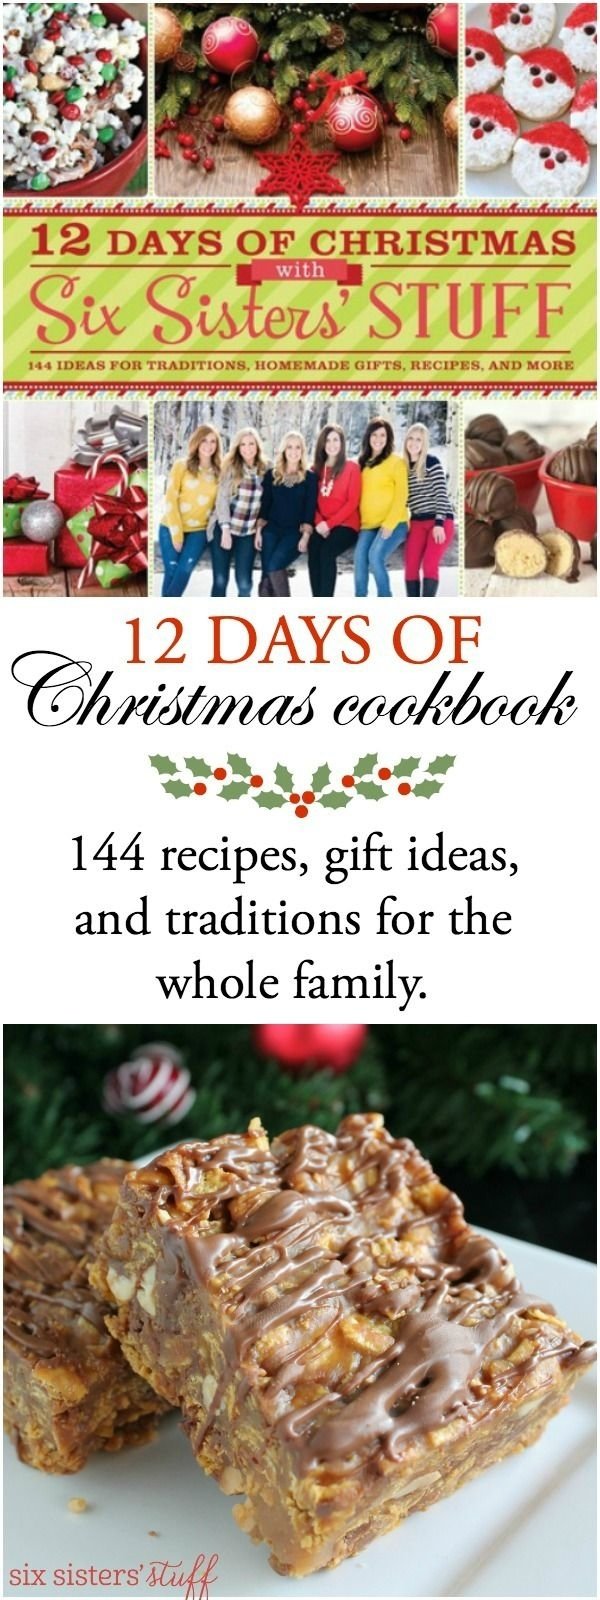 10 Wonderful 12 Days Of Christmas Food Ideas 447 best six sisters stuff projects images on pinterest big 2022